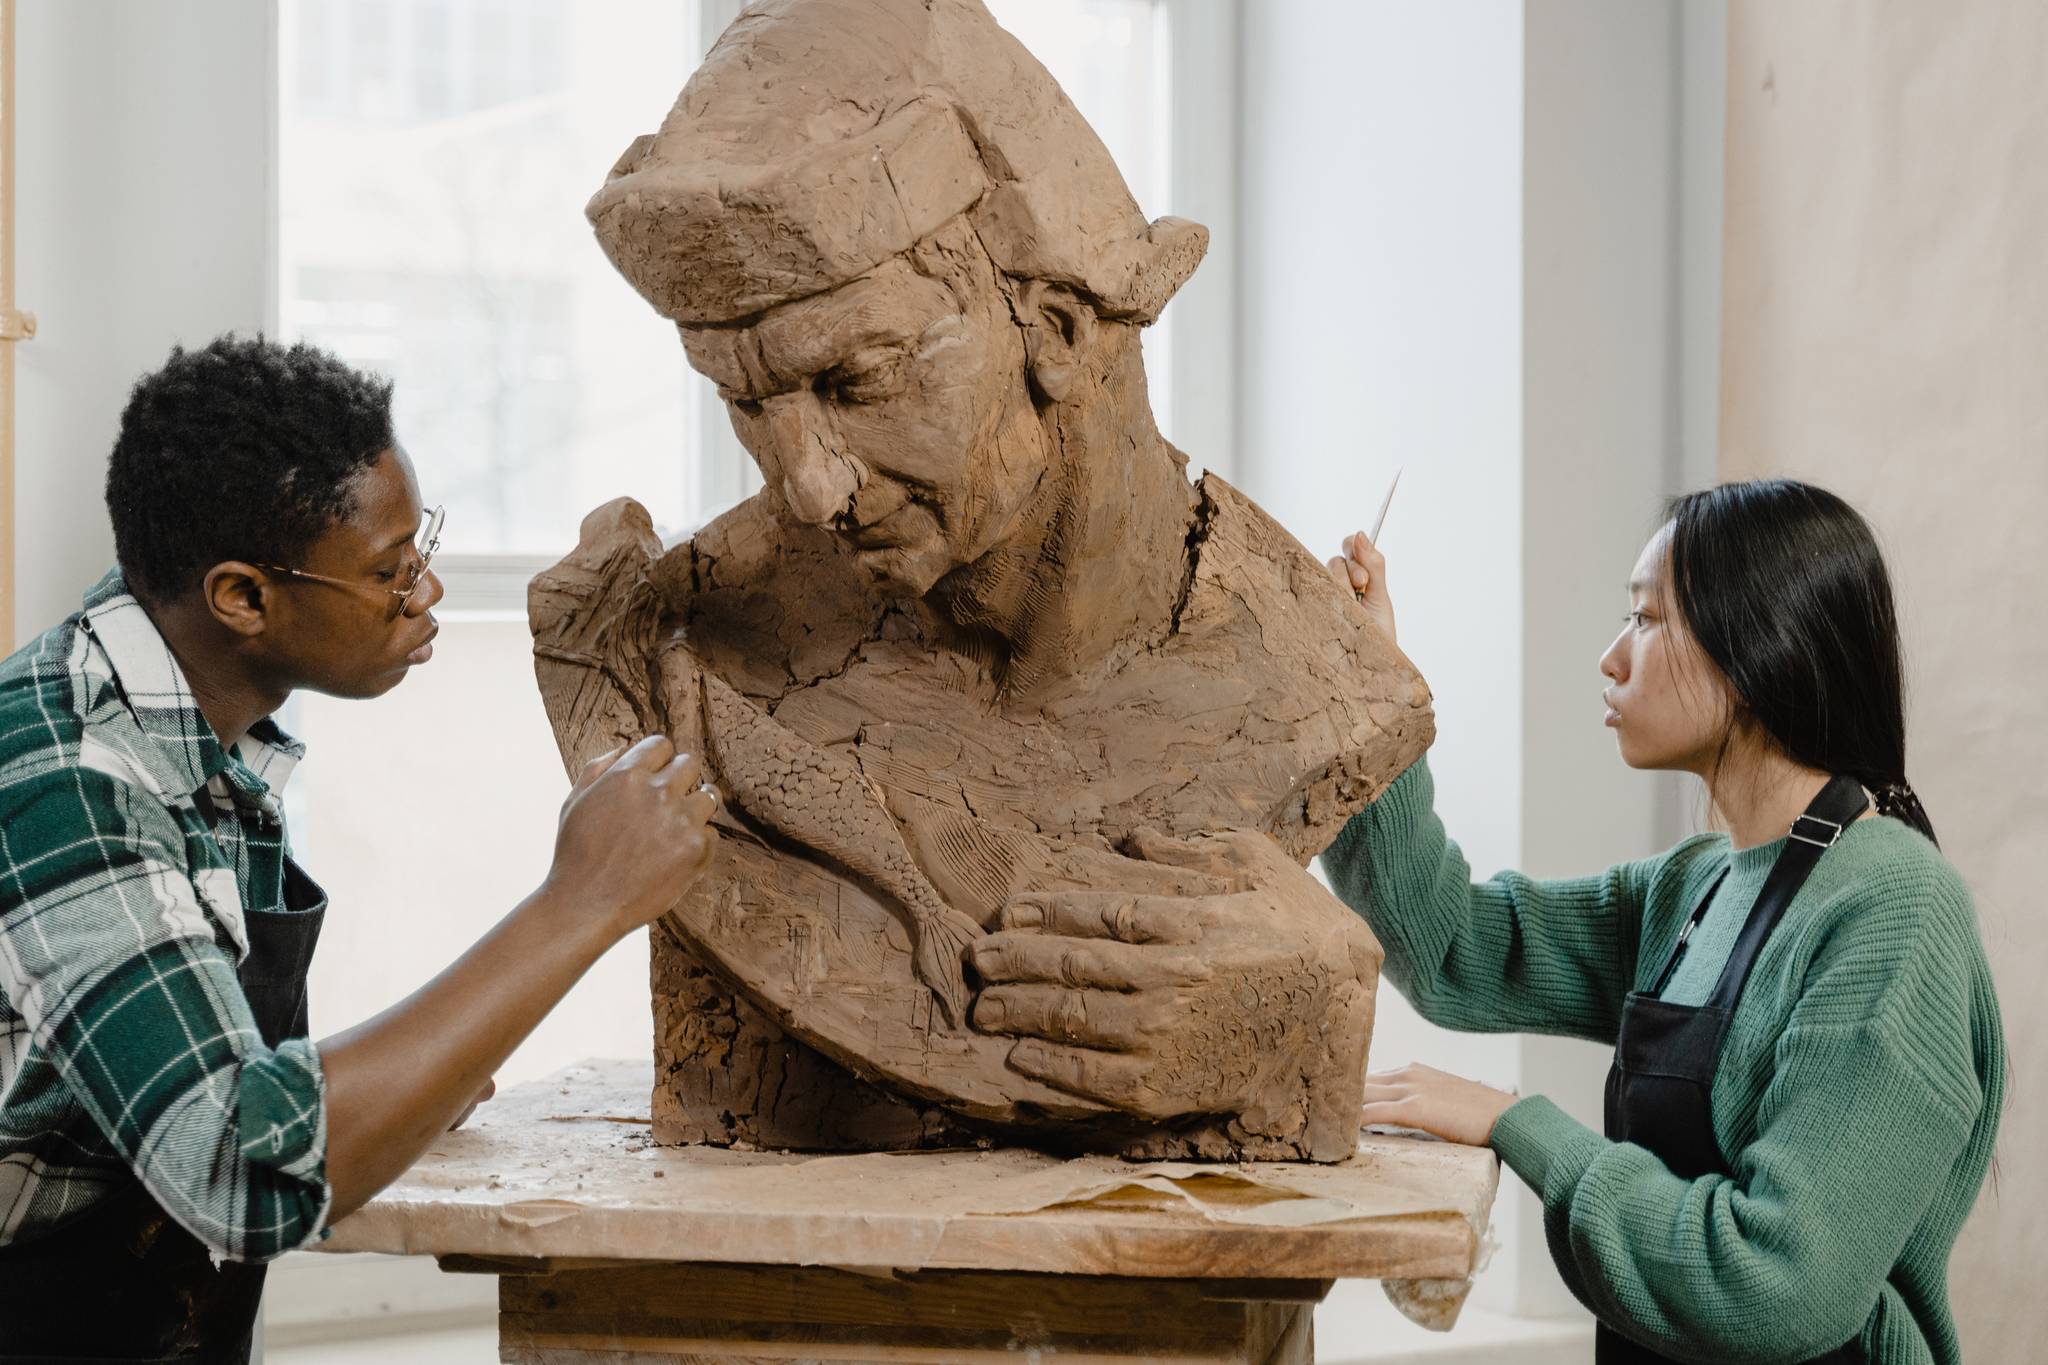 Tate diversifies museum staff with free curation course